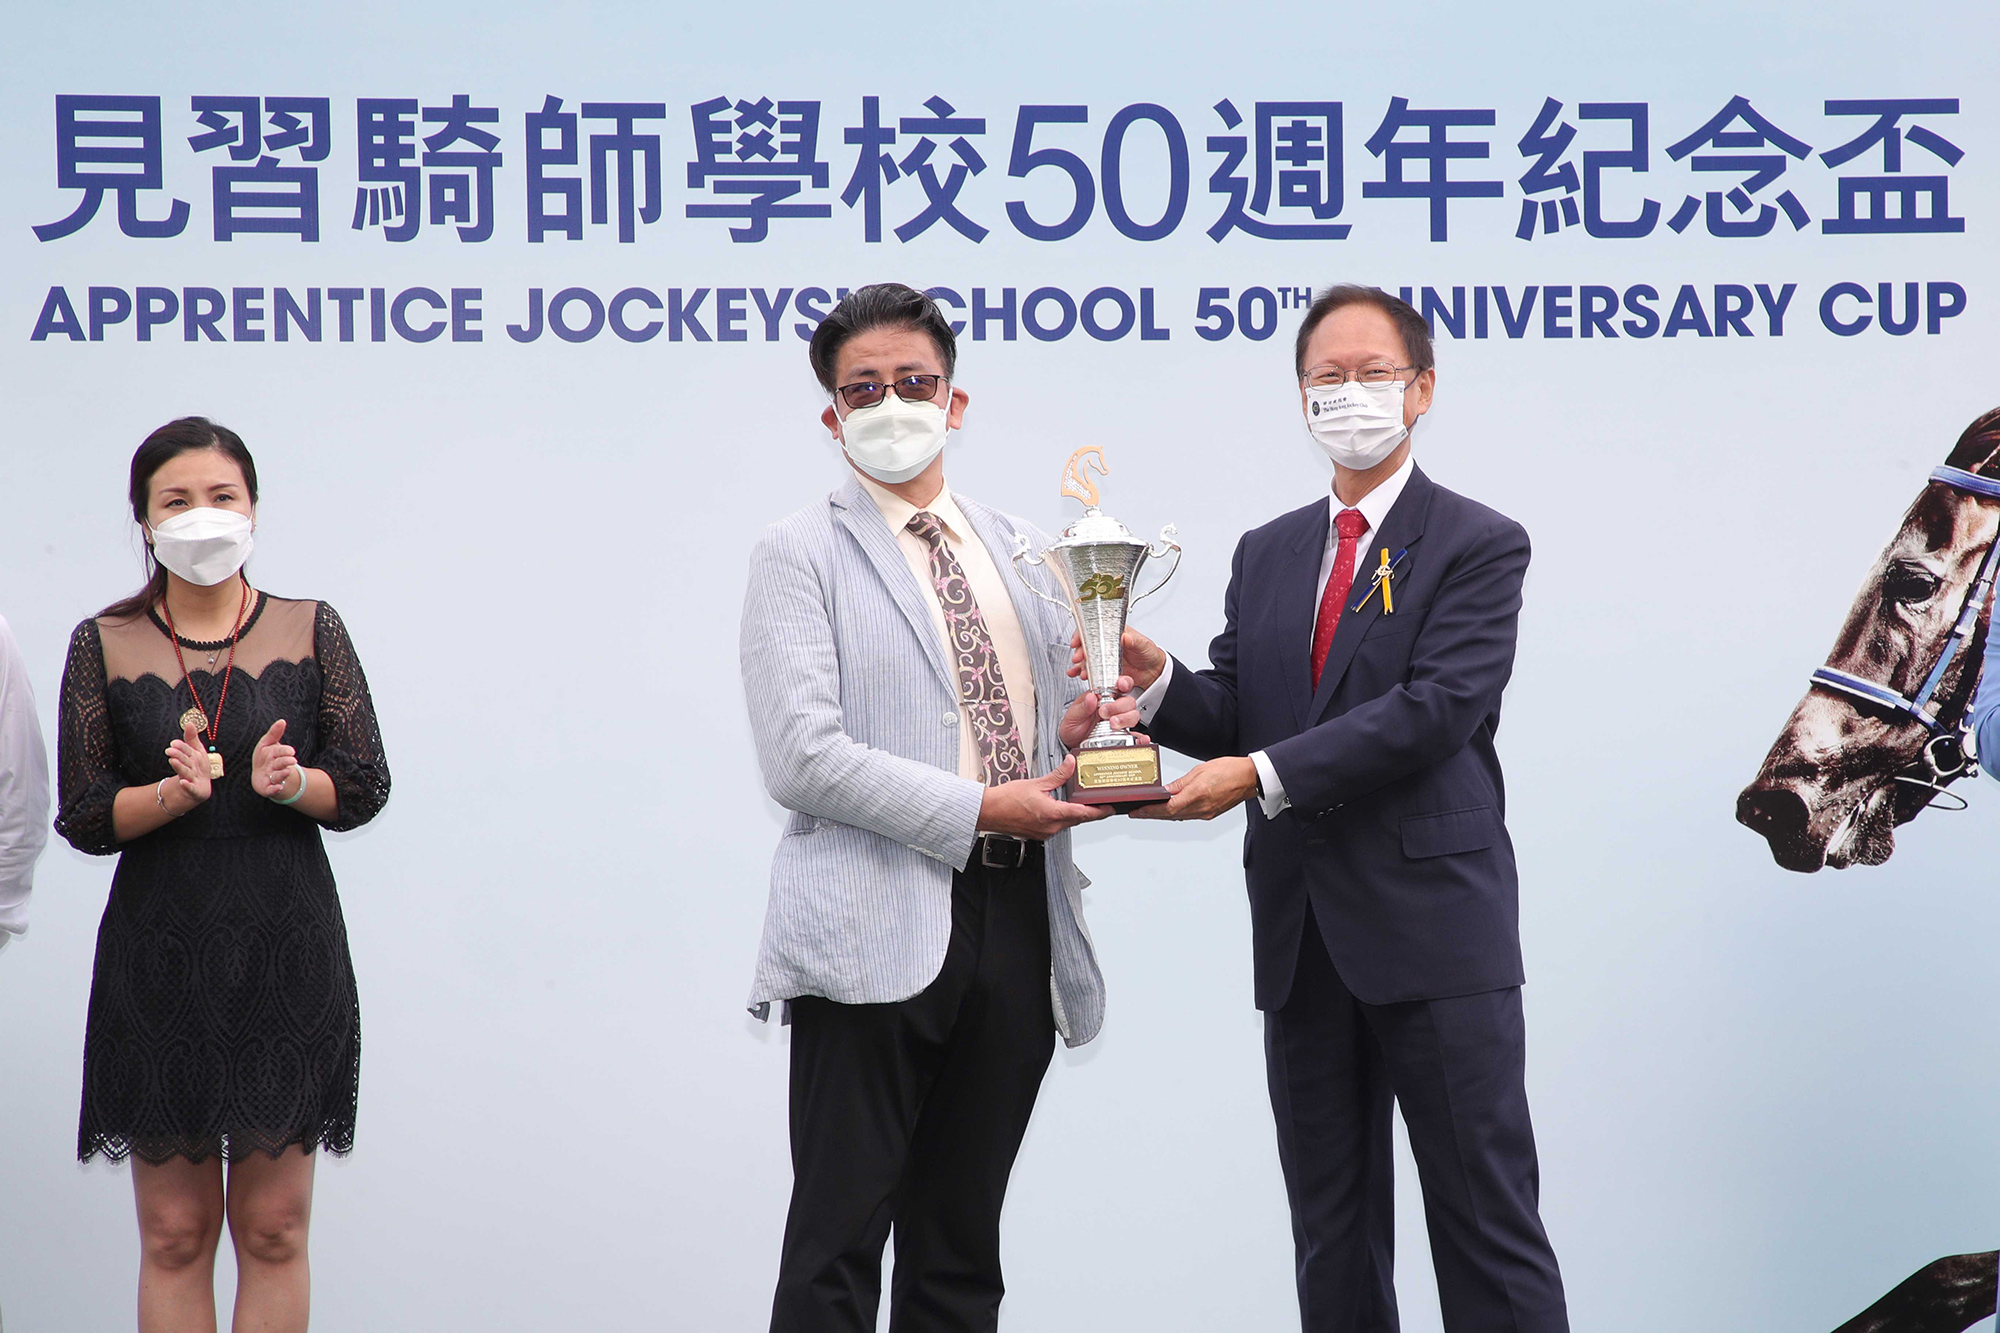 Chairman of The Hong Kong Jockey Club Mr Philip Chen presents the Apprentice Jockeys’ School 50th Anniversary Cup and trophies to Ace One’s owner representatives, trainer Douglas Whyte and jockey Ruan Maia.